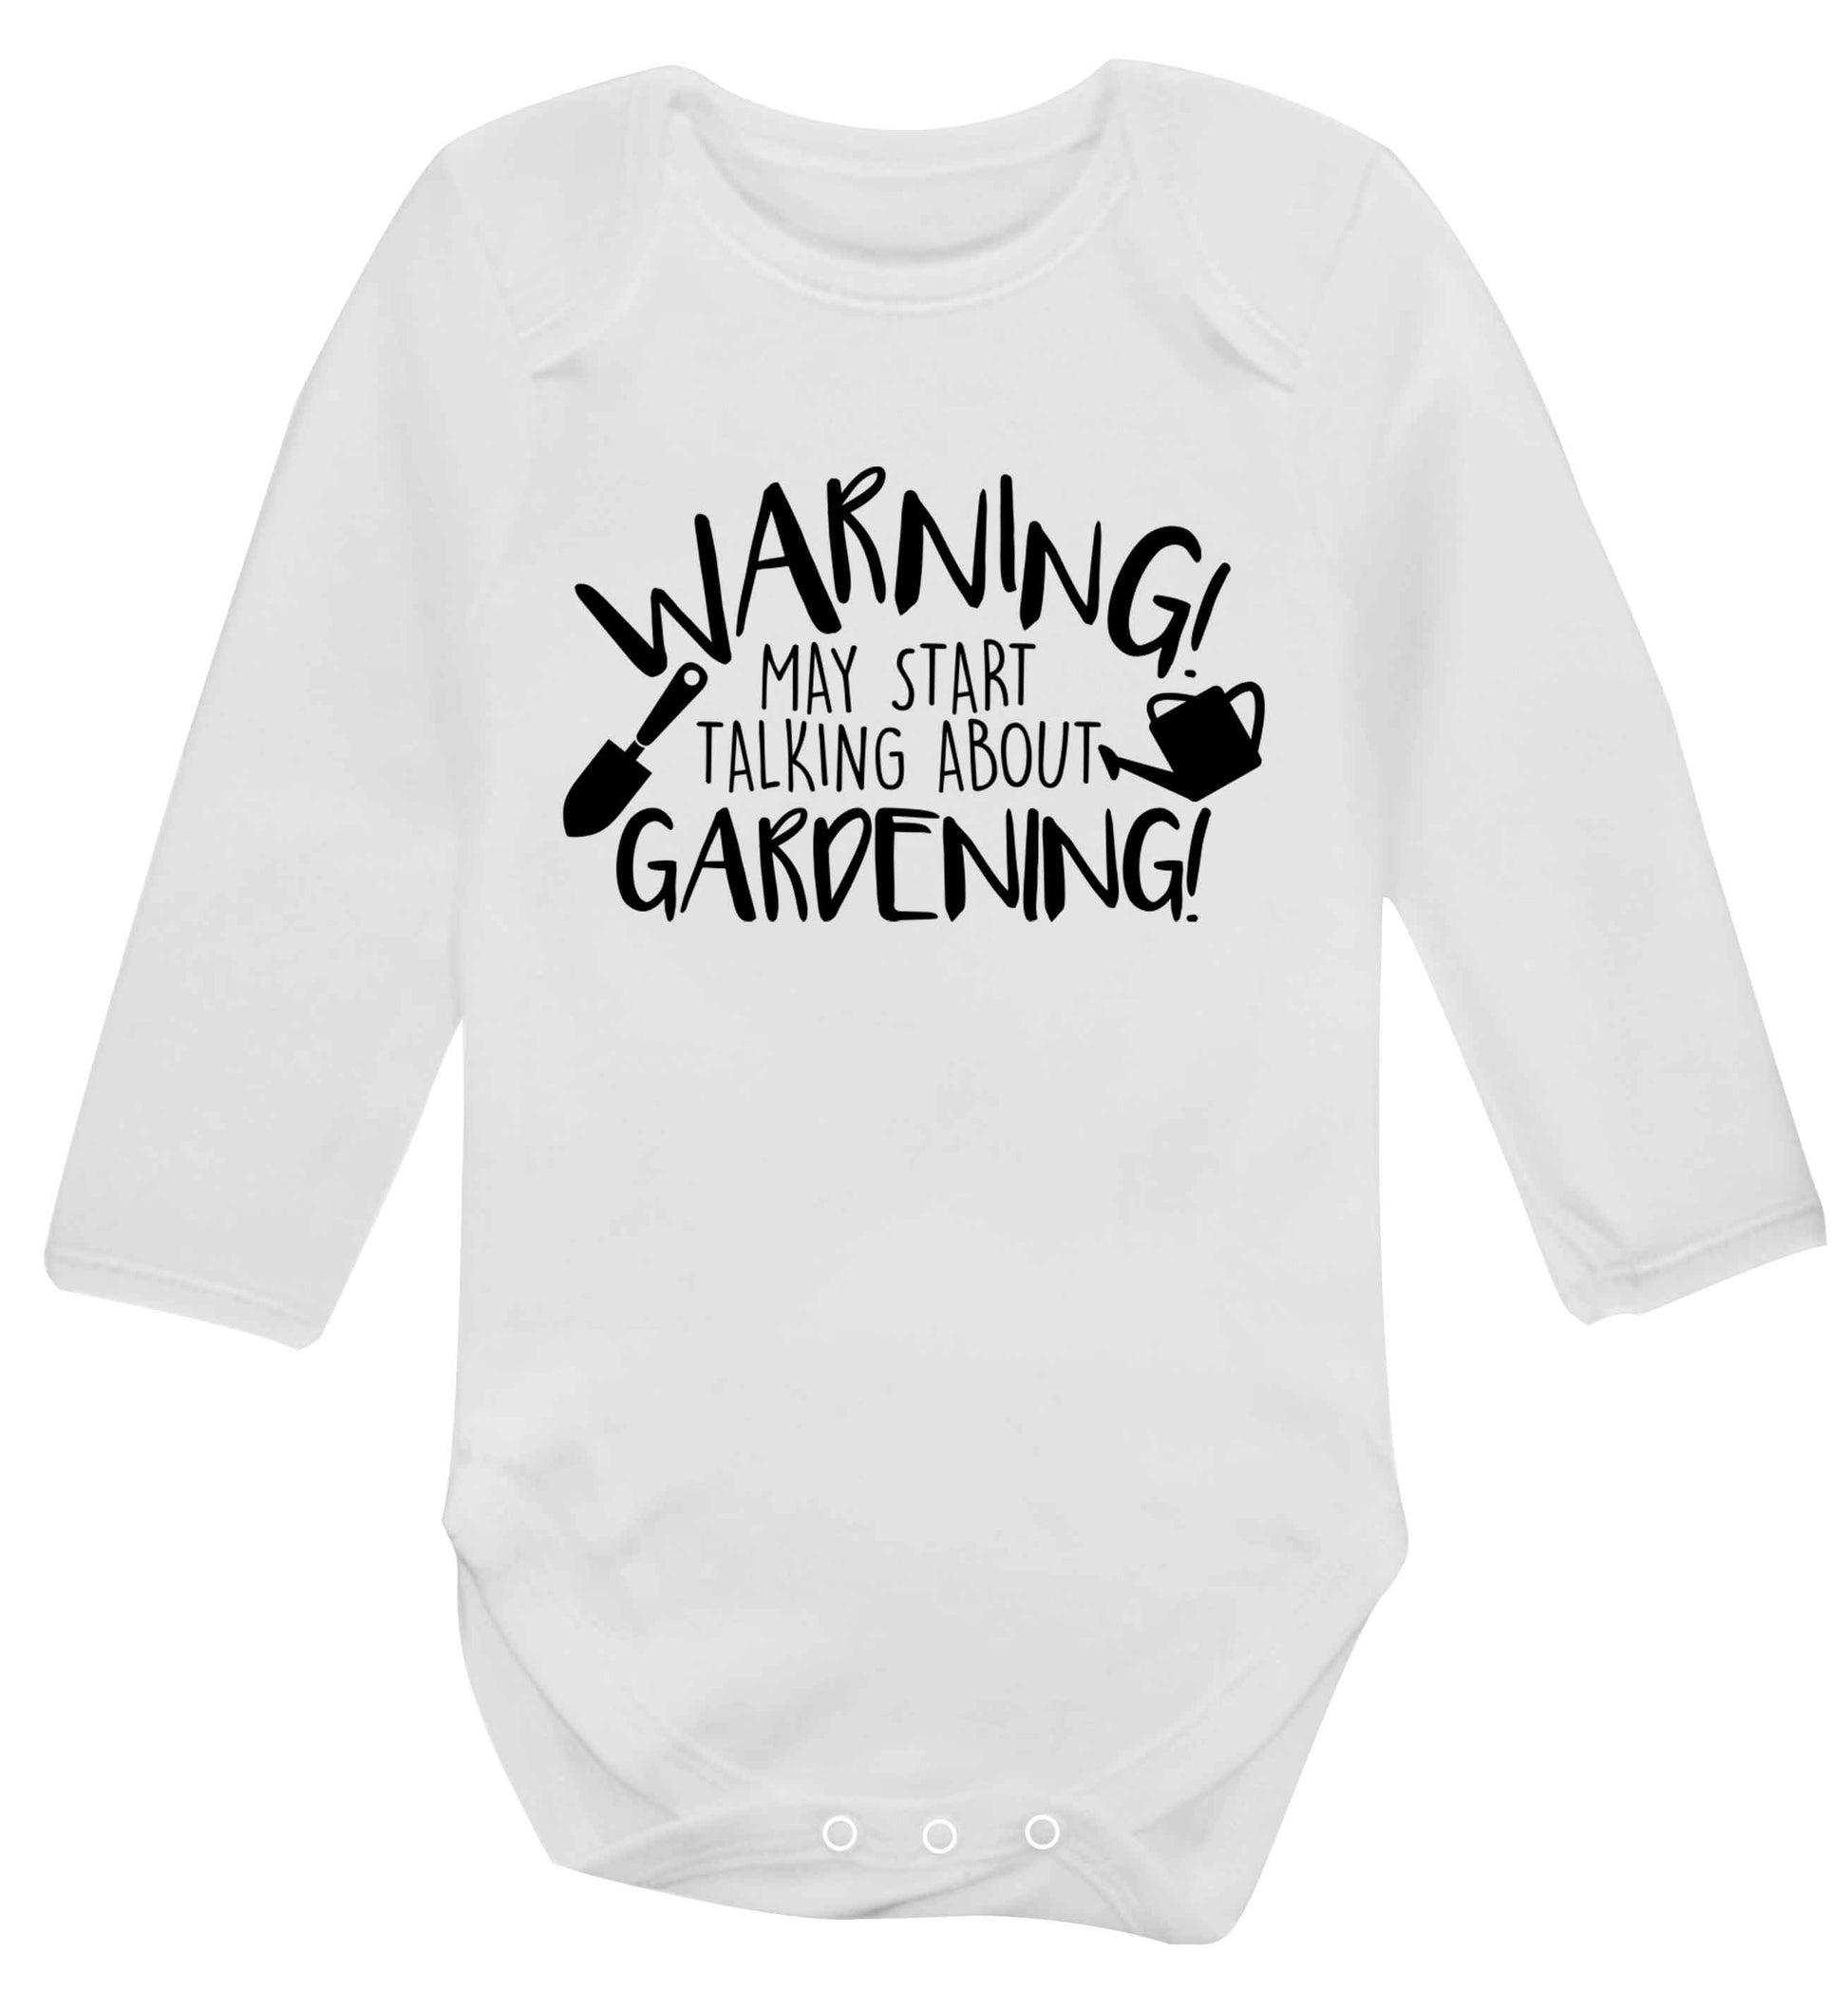 Warning may start talking about gardening Baby Vest long sleeved white 6-12 months